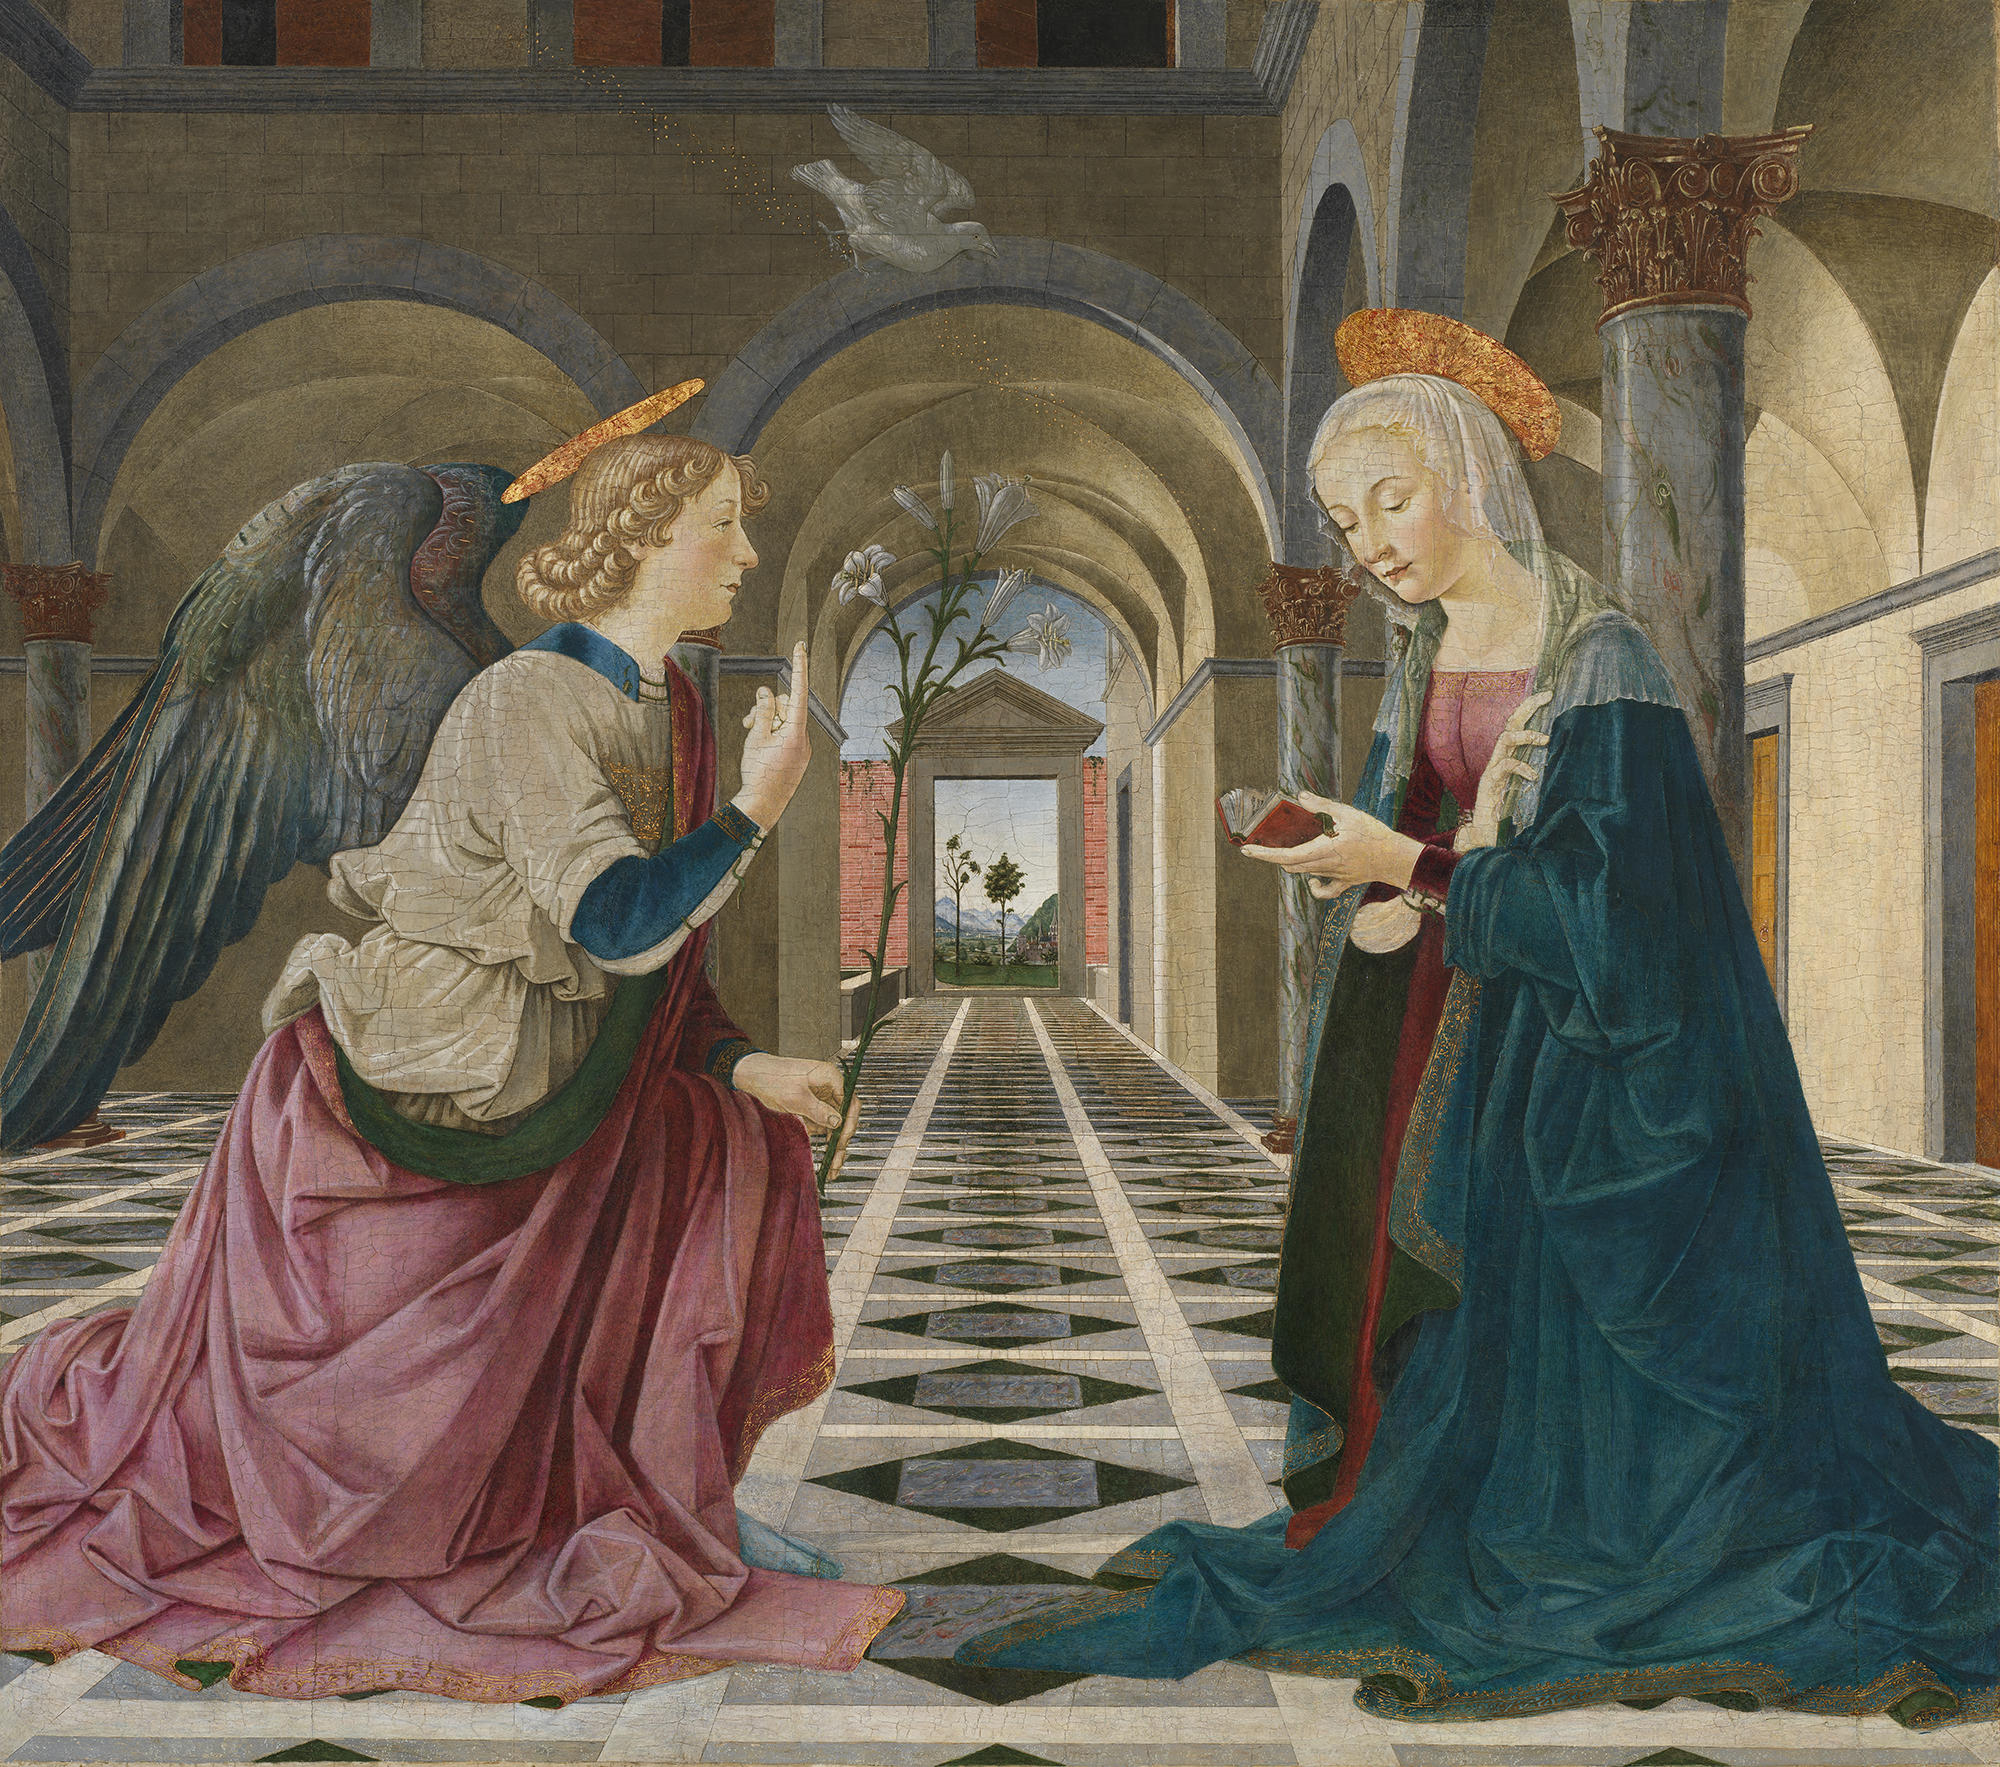 The Annunciation painting